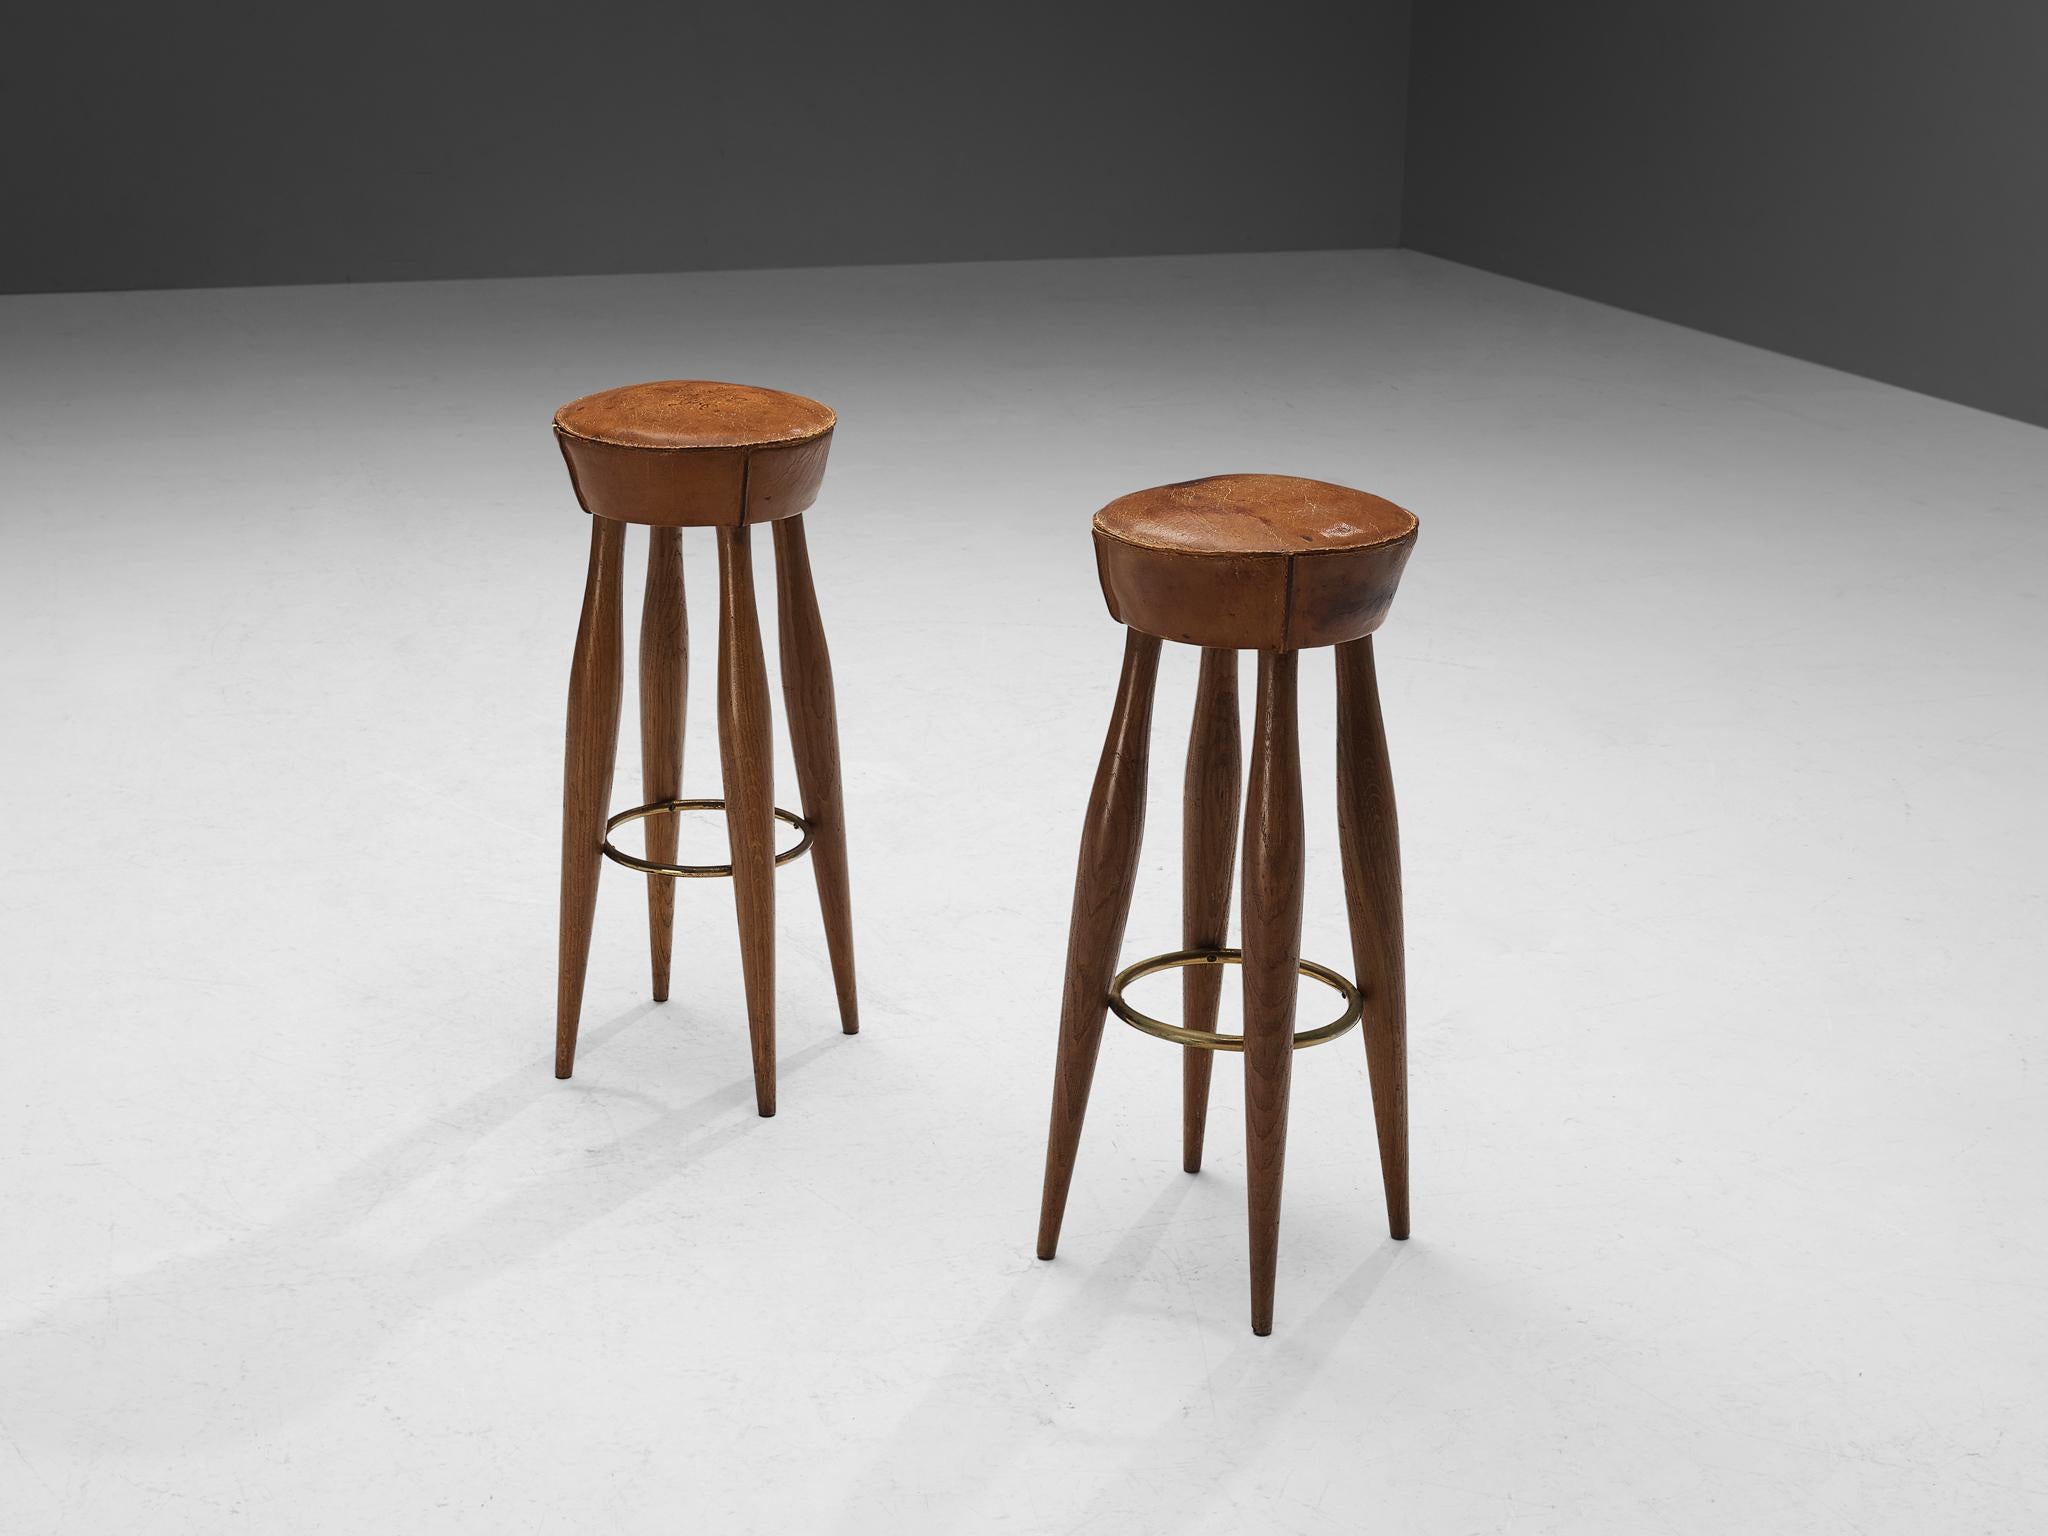 Pair of stools, oak, patinated leather, brass, Italy, 1950s

Charming and charismatic pair of stools made in Italy in the 1950s. These stools show elegant detailing, like the outward stitching of the leather seats, and the brass circle in between